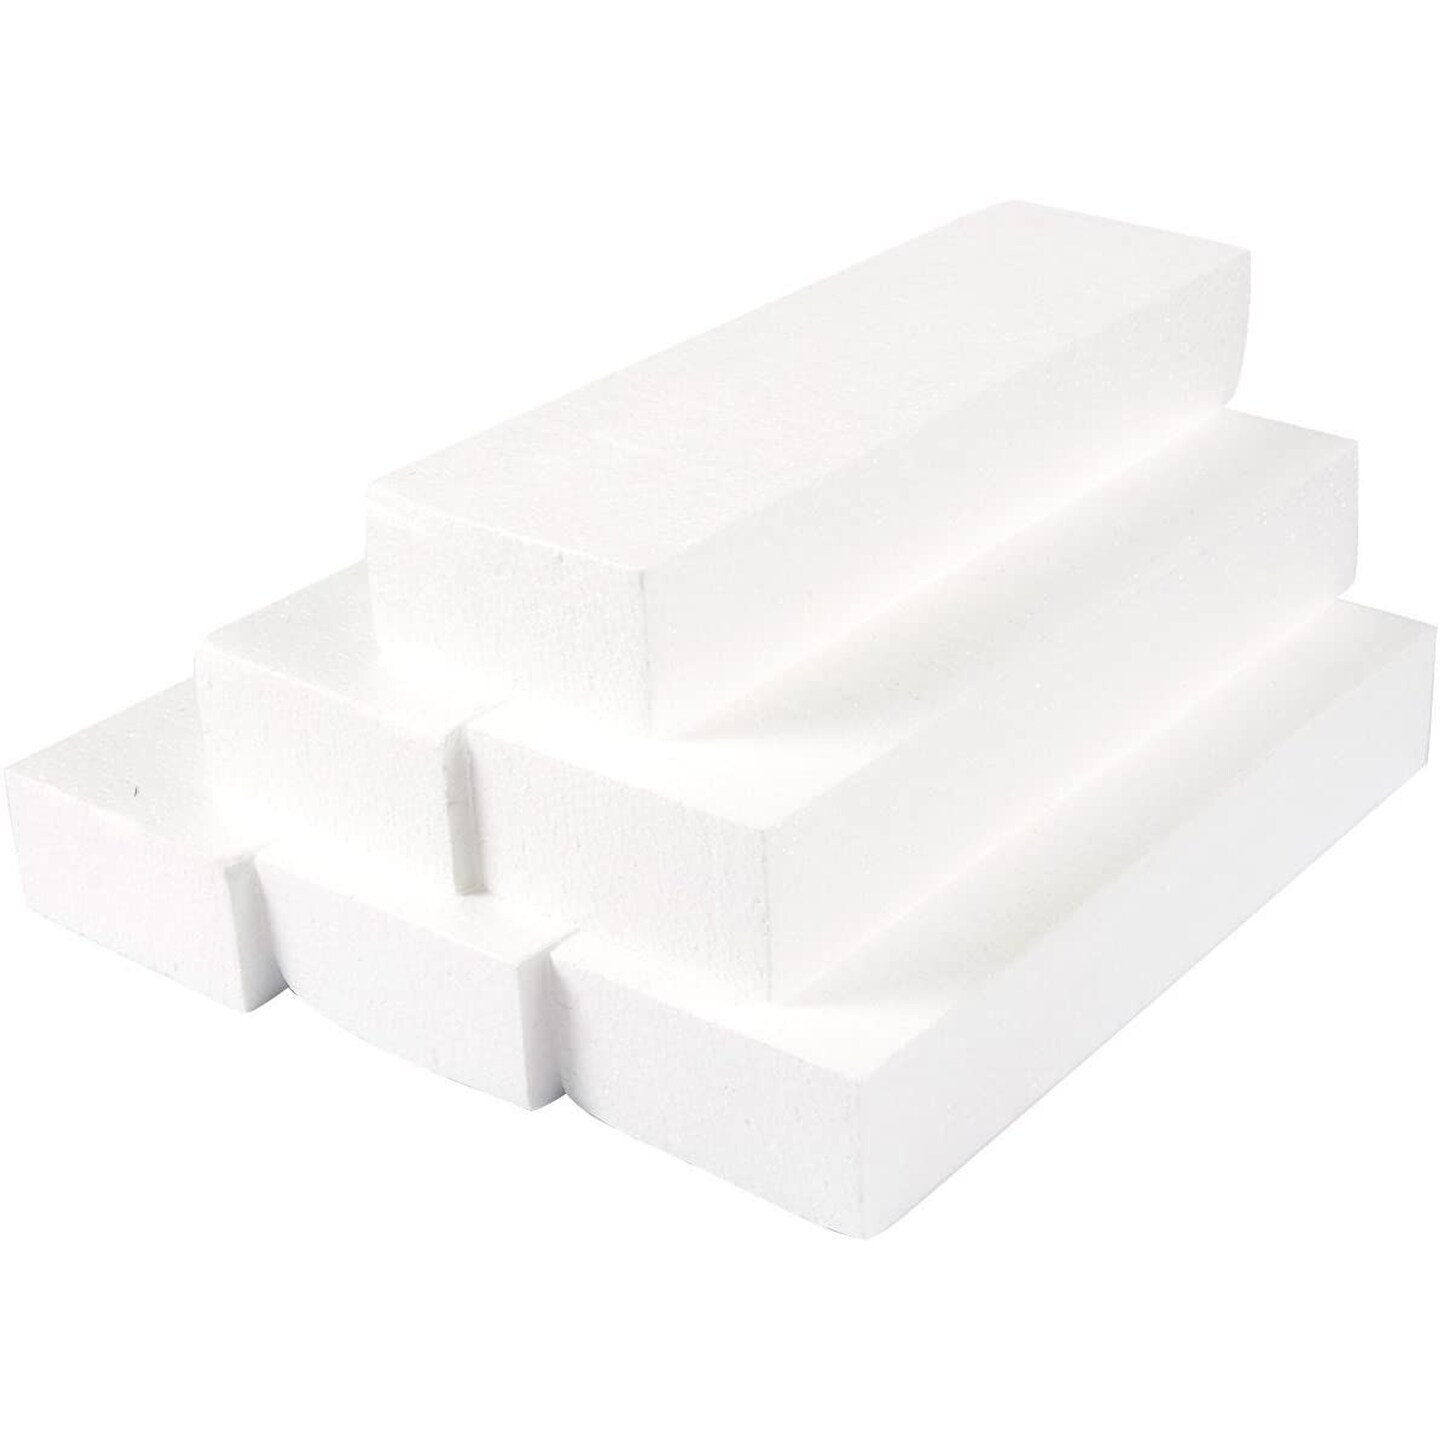 Juvale 6 Pack Foam Rectangles for Crafts, Floral Arrangements, DIY Projects, (12 x 6 x 1 in)